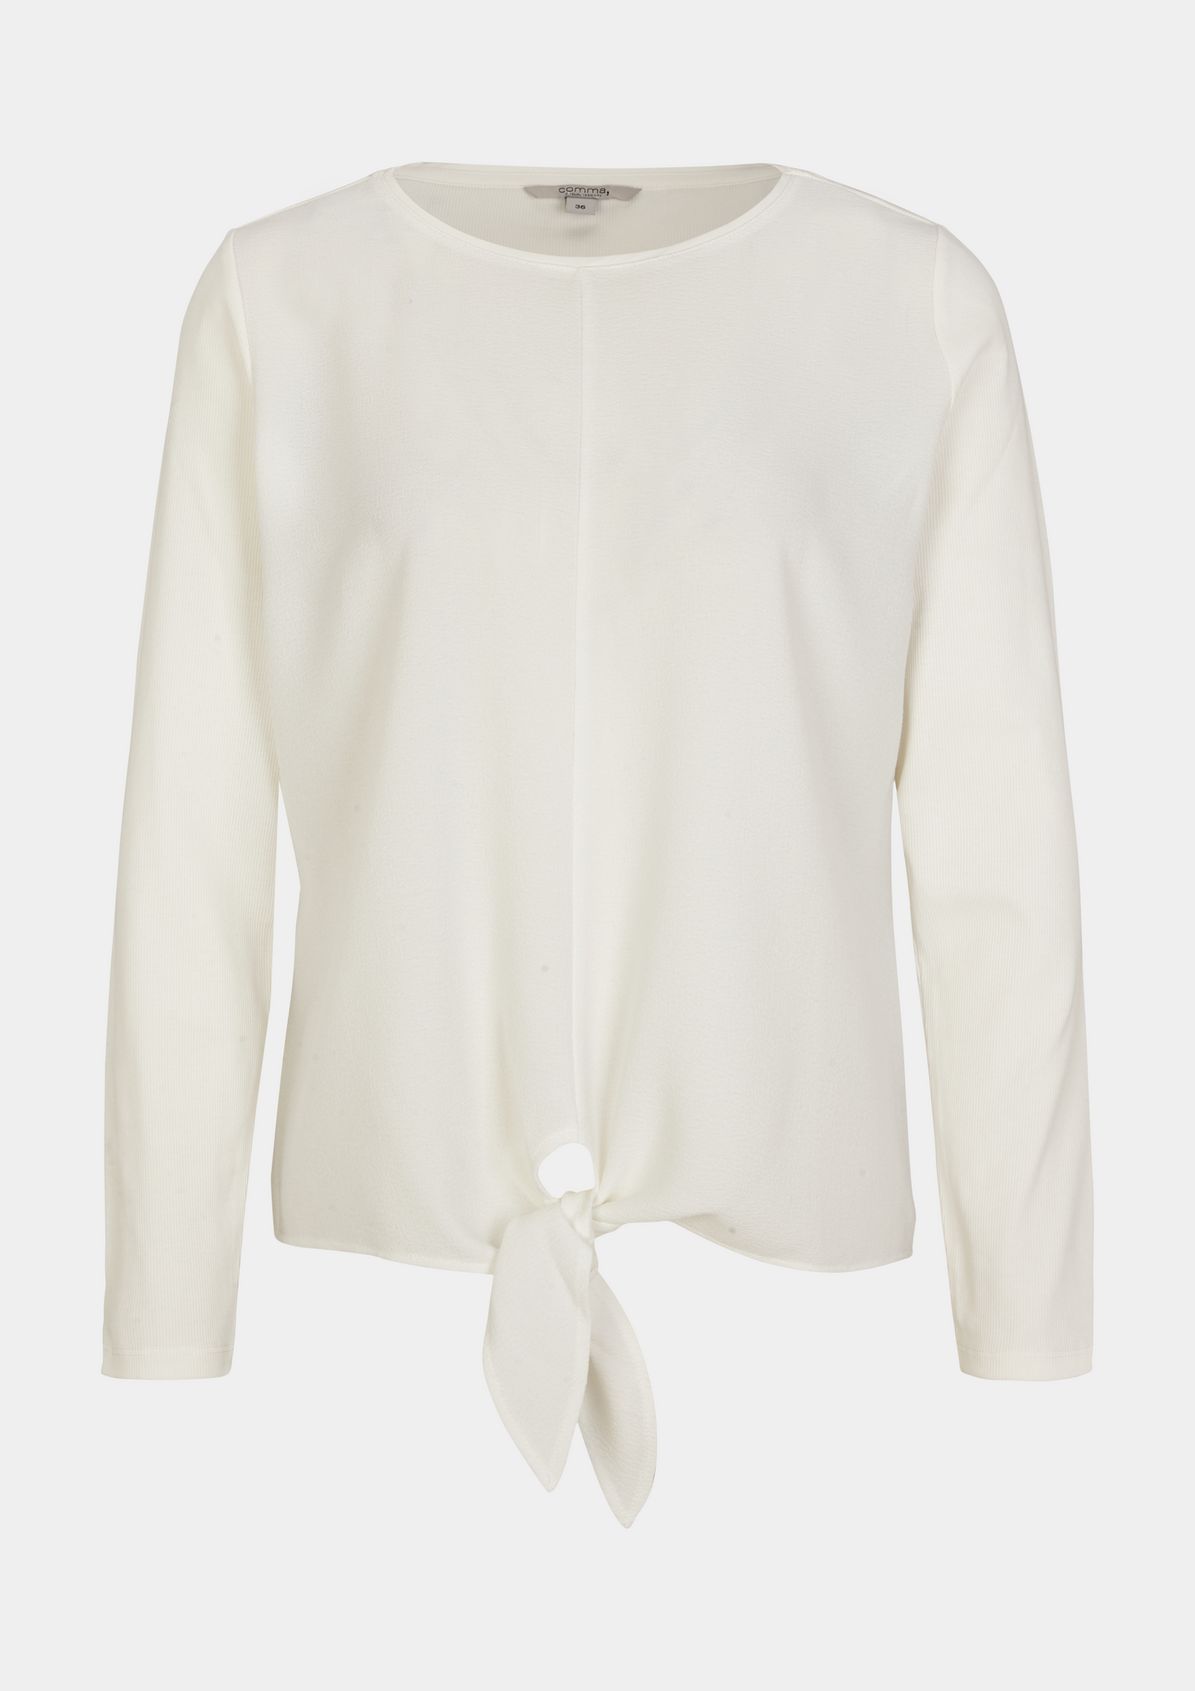 Long sleeve top with a knotted detail from comma